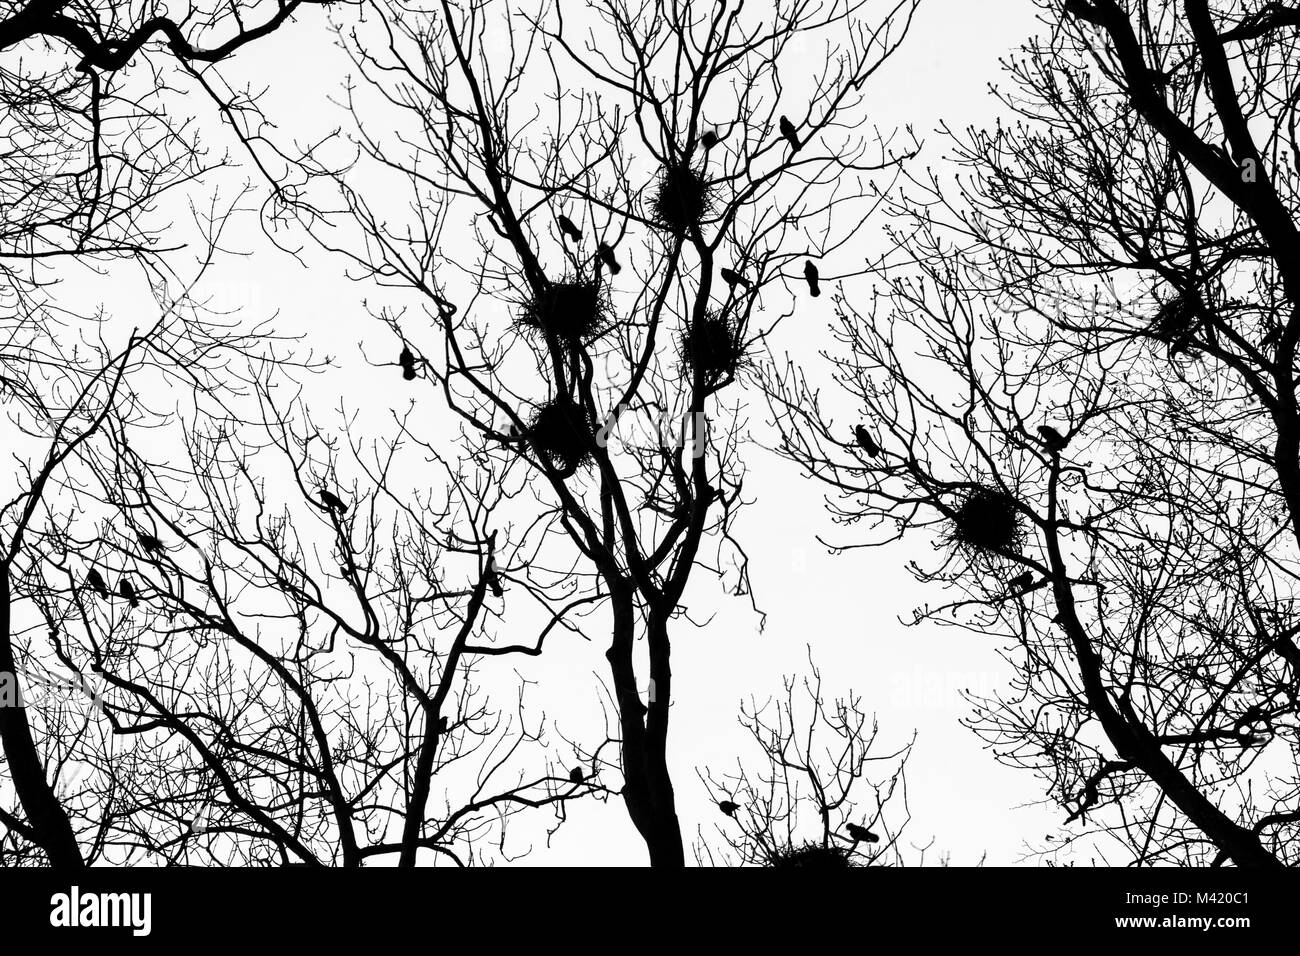 A black and white picture from the city park when the darkness comes. The silhouettes of the trees are only visible with the nests of the crows. Stock Photo